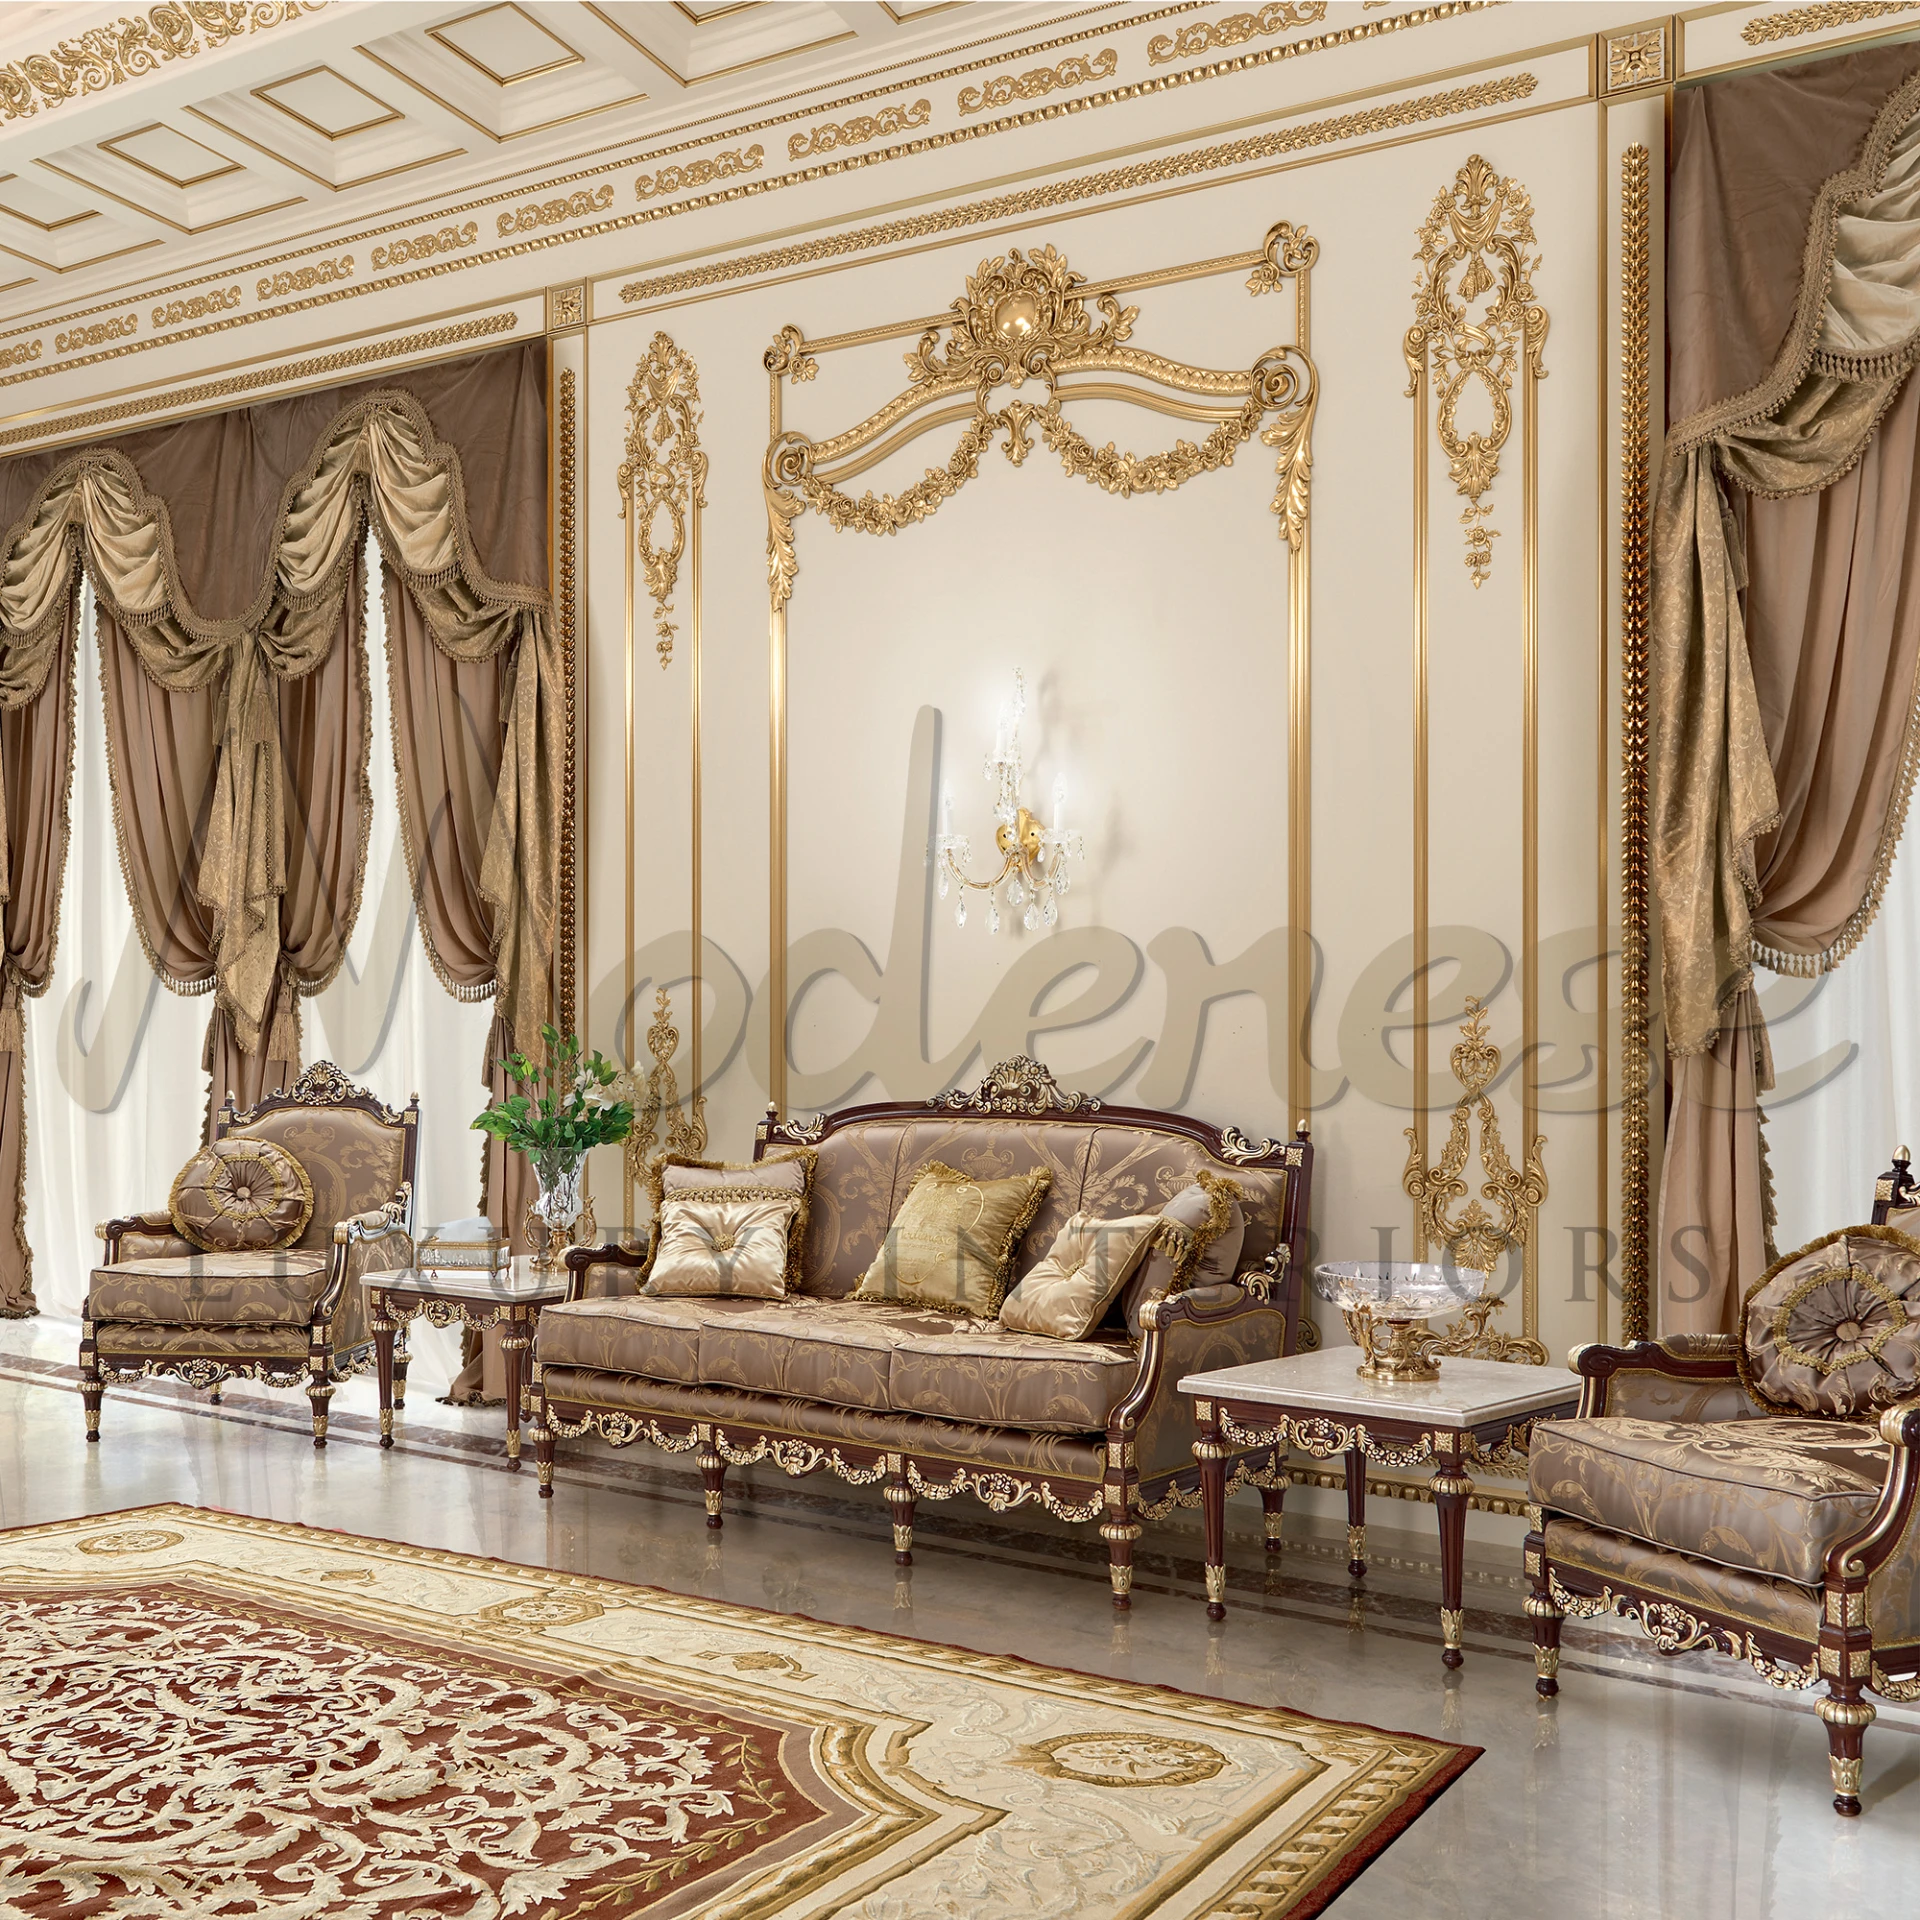 Luxurious Italian handcrafted Royal Brown Sofa, perfect for adding a touch of elegance to every room in royal projects.
